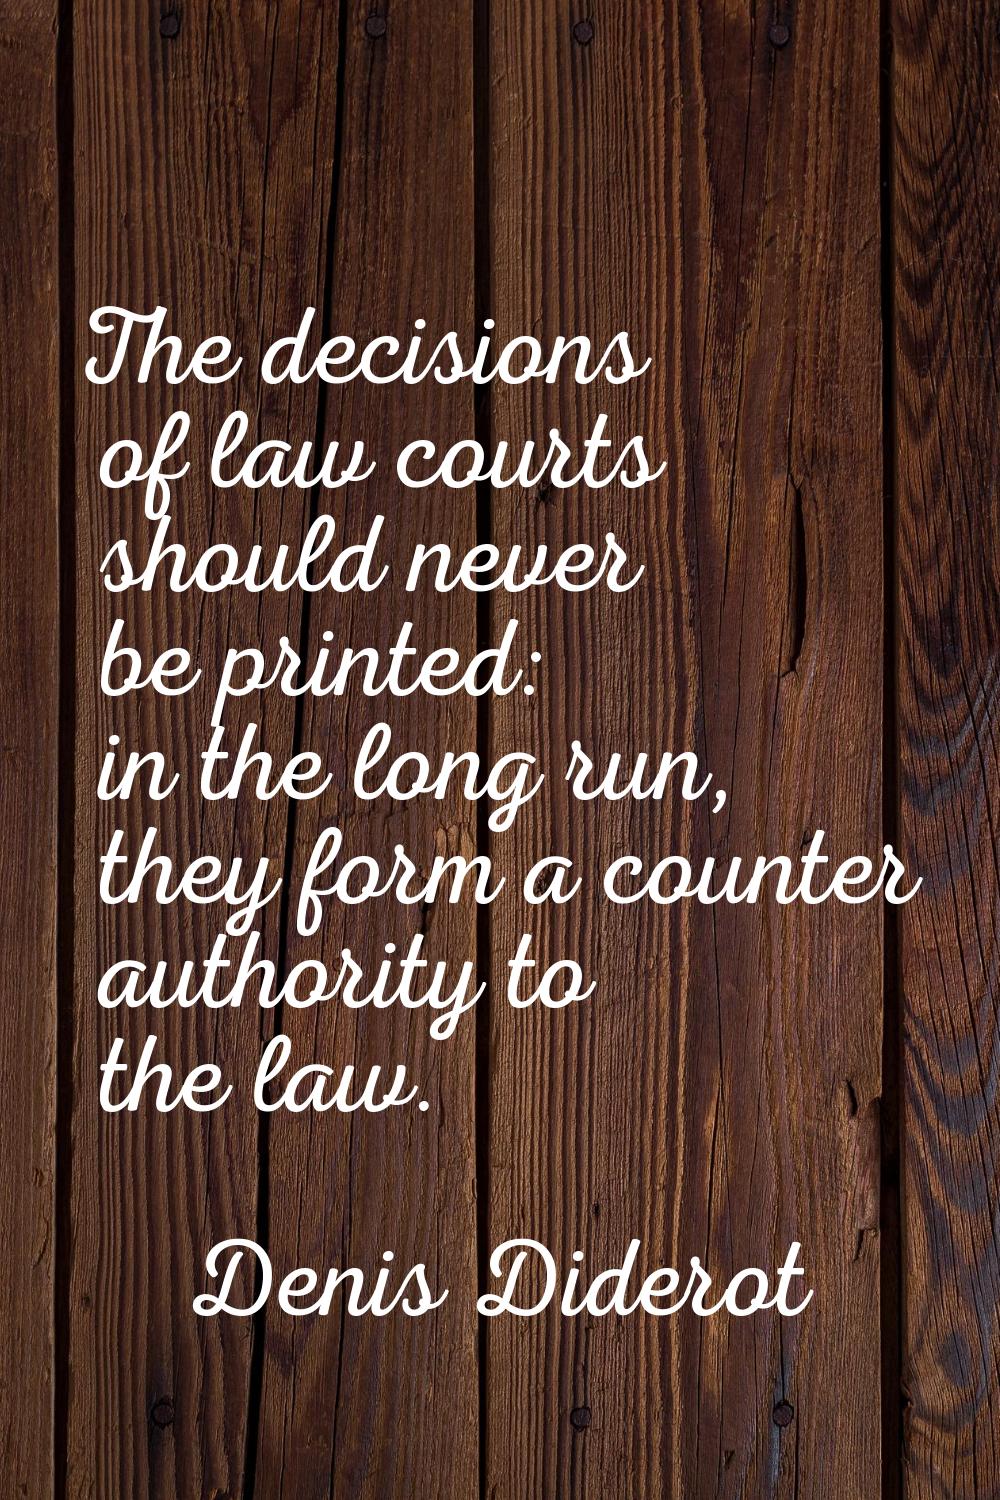 The decisions of law courts should never be printed: in the long run, they form a counter authority